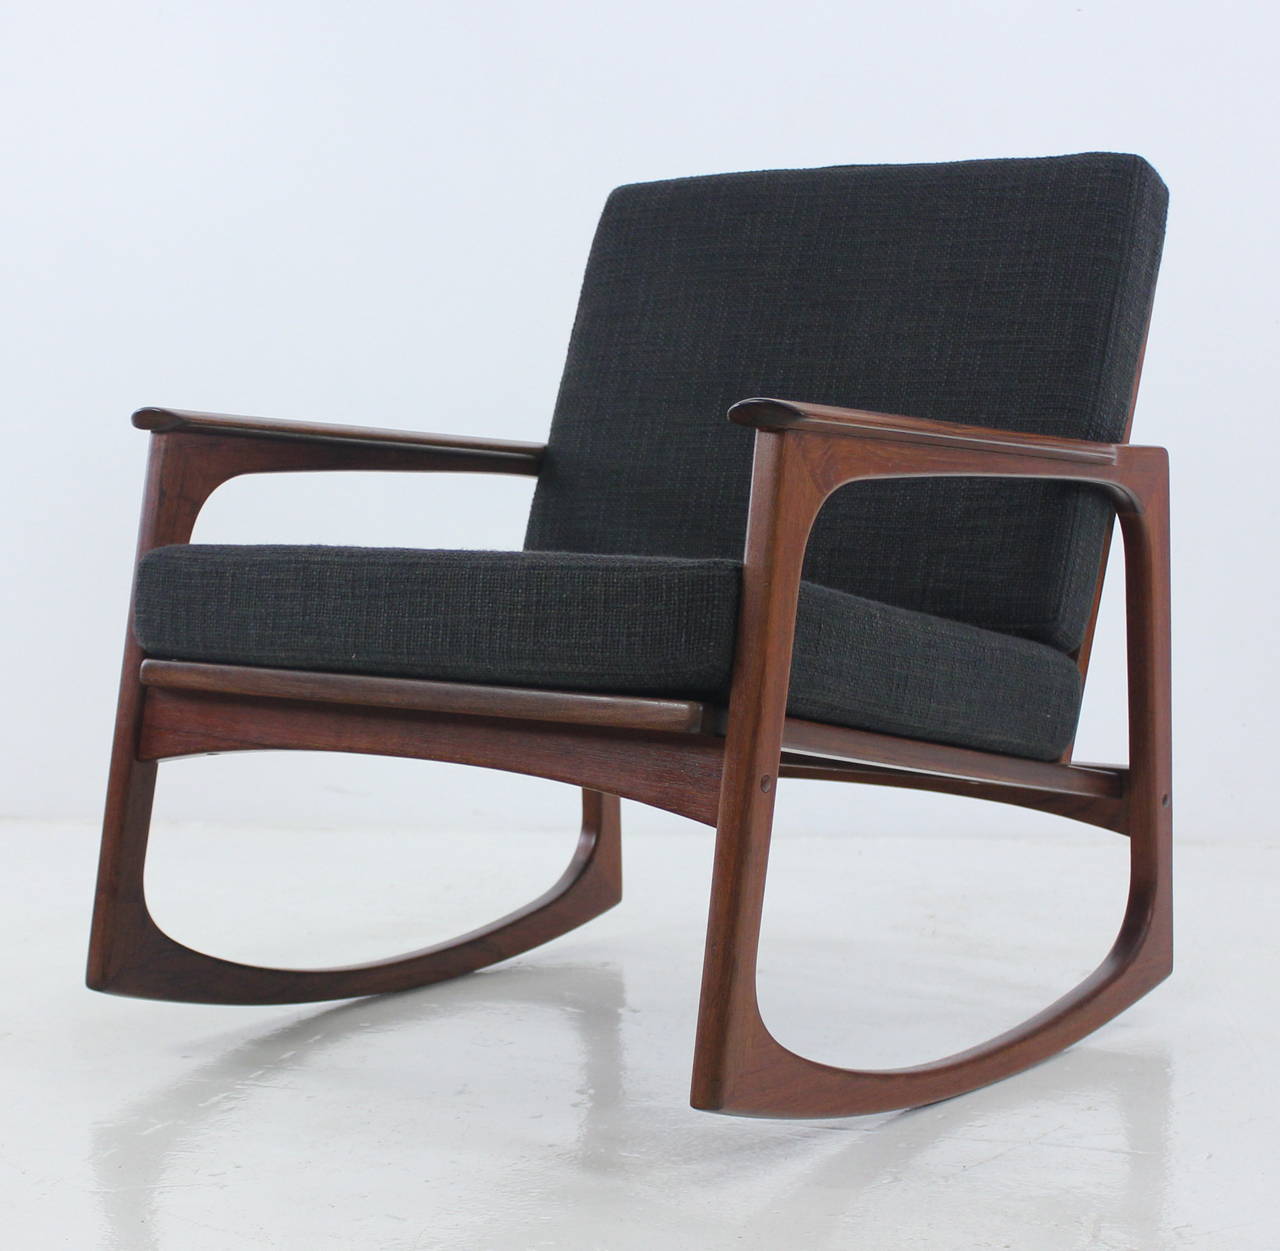 Danish modern rocking chair designed by Jacob Kjaer.
Timeless style and comfort.
Rich teak frame.
New foam cushions newly upholstered in highest quality period fabric.
Professionally restored and refinished by LookModern.
Matchless quality and